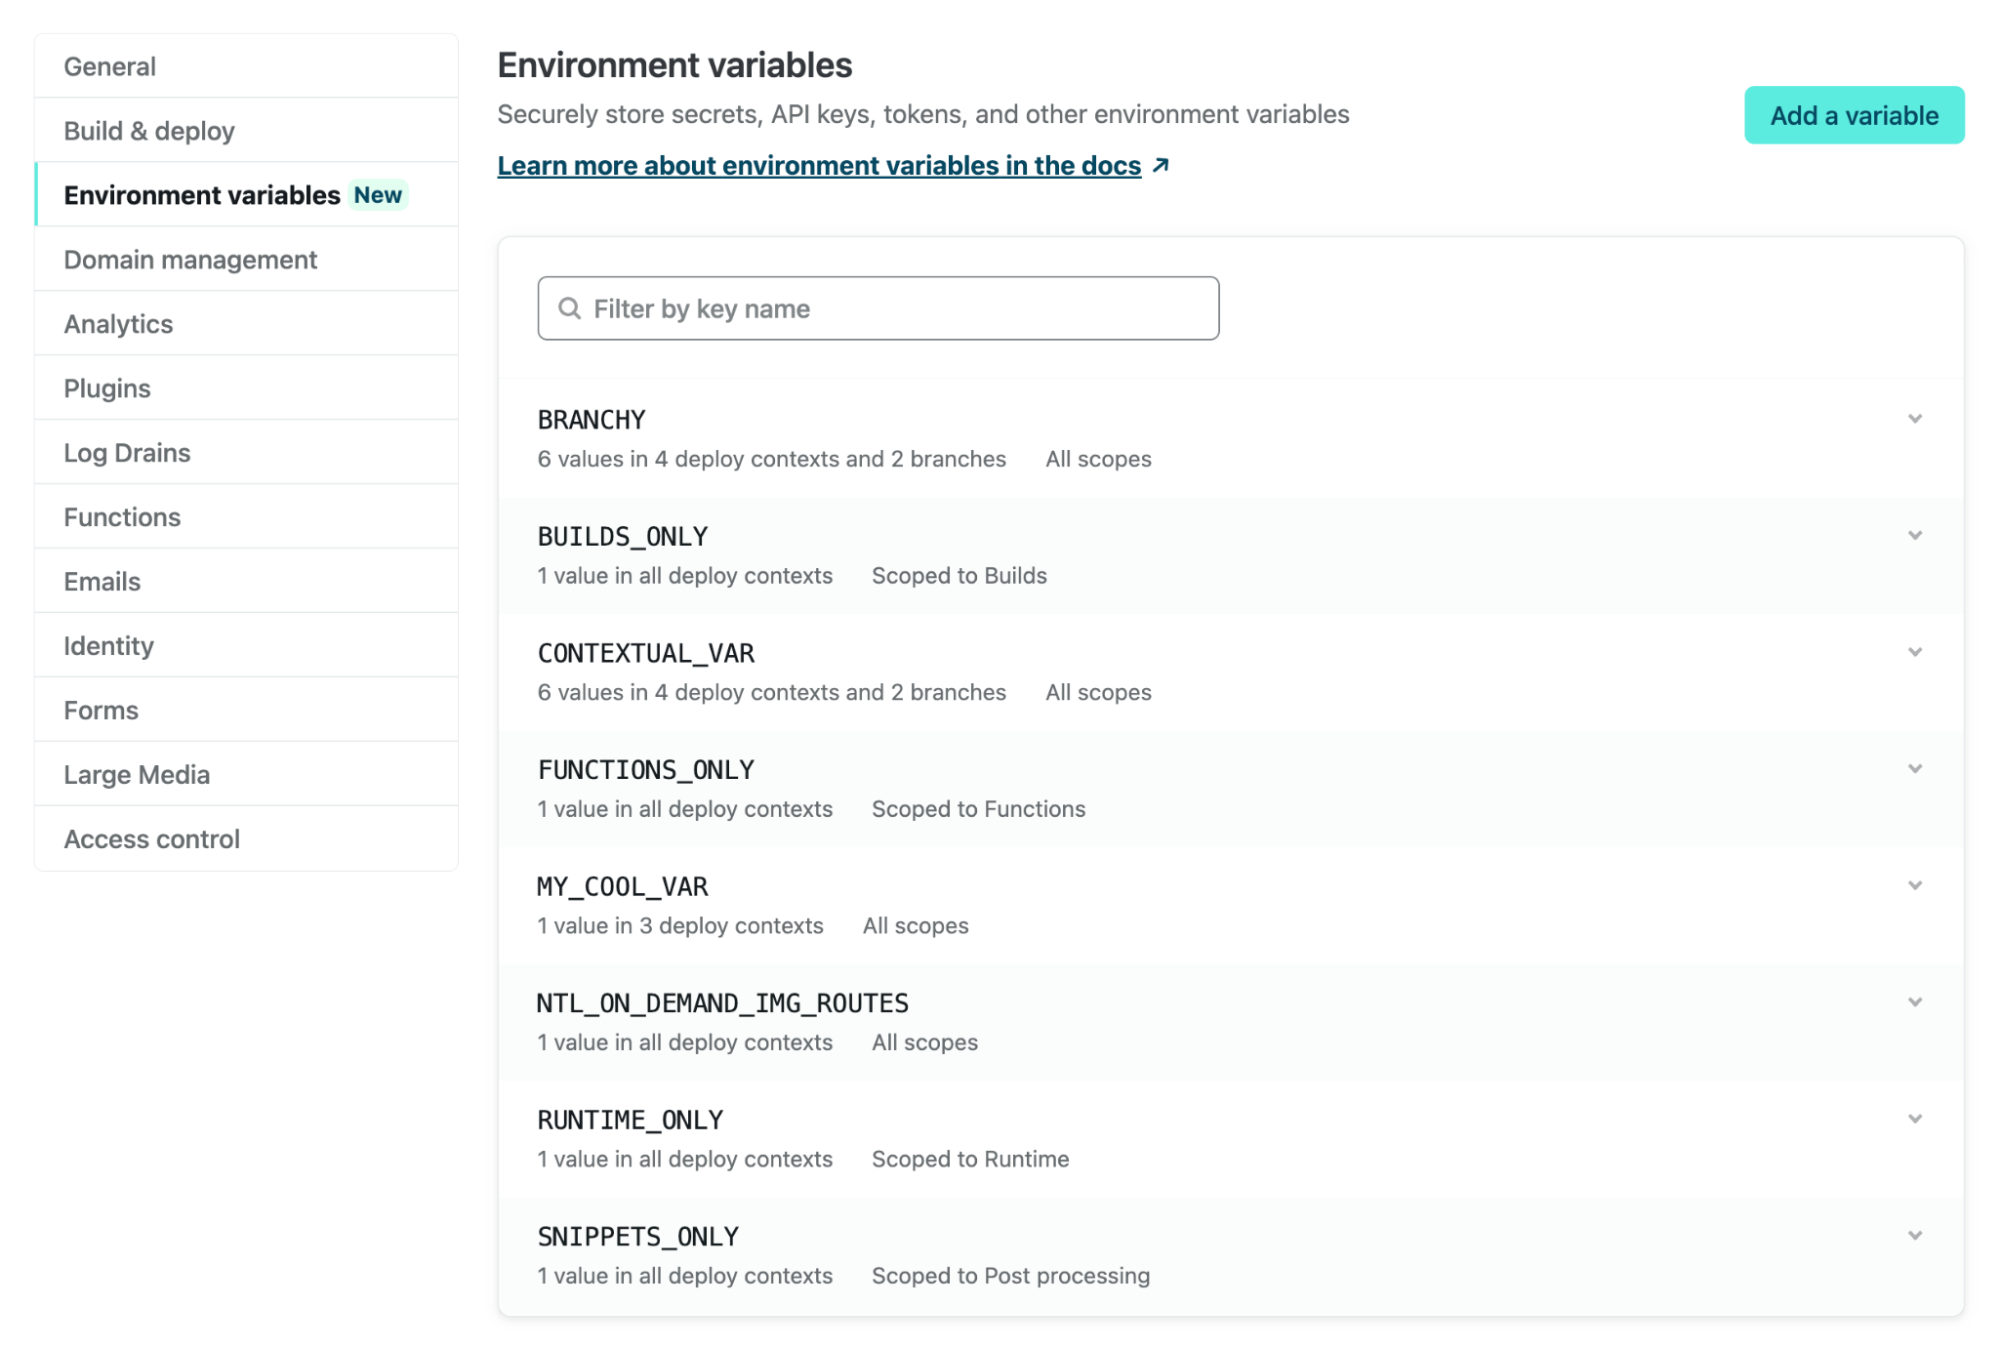 Find environment variables under your site settings.